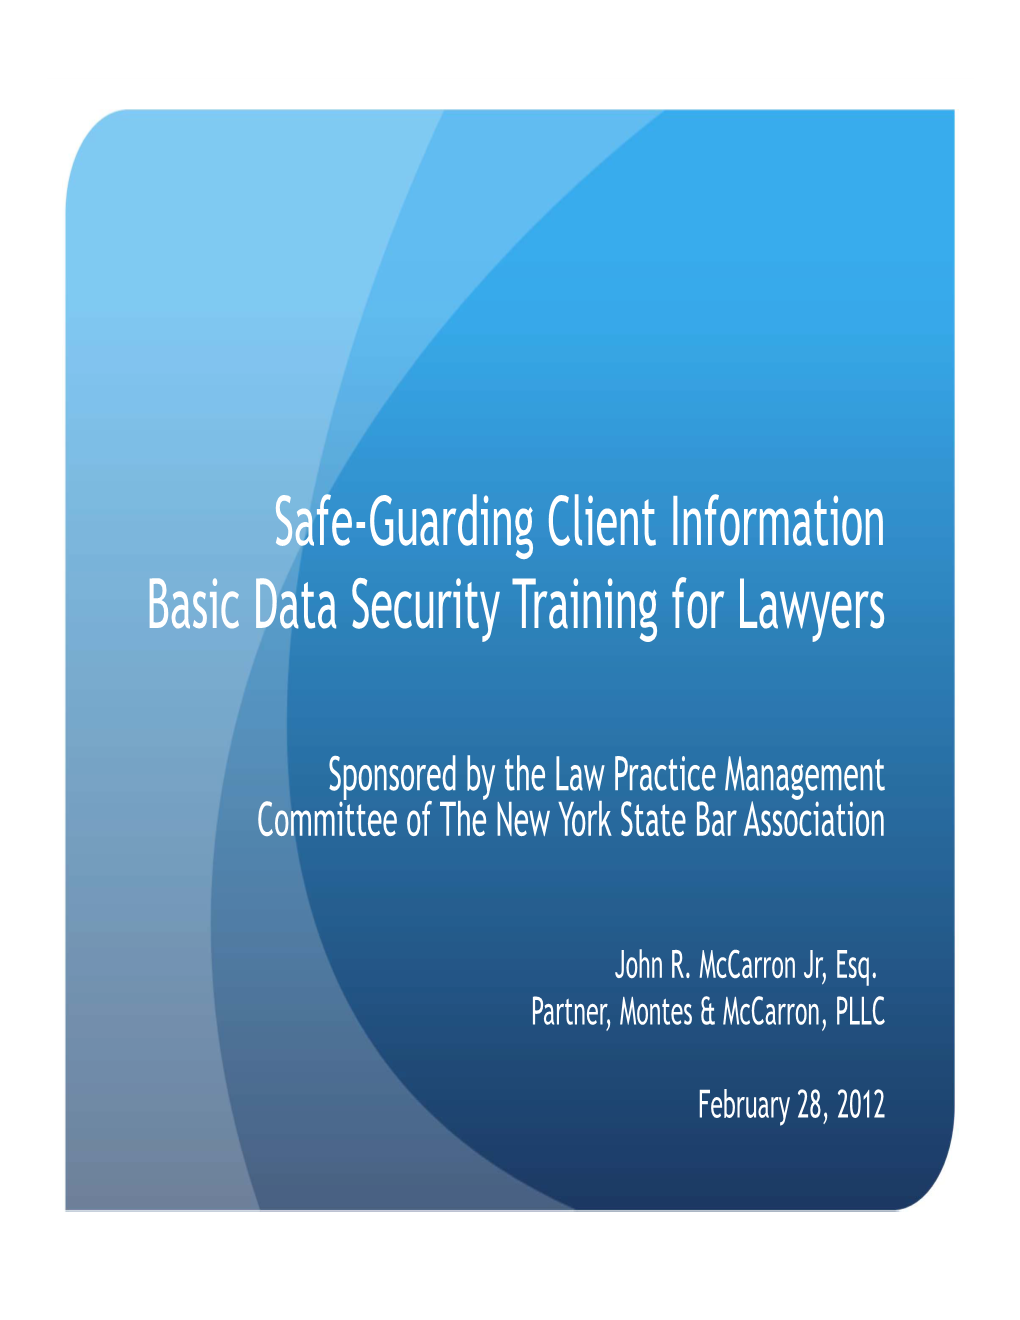 Safe-Guarding Client Information Basic Data Security Training for Lawyers